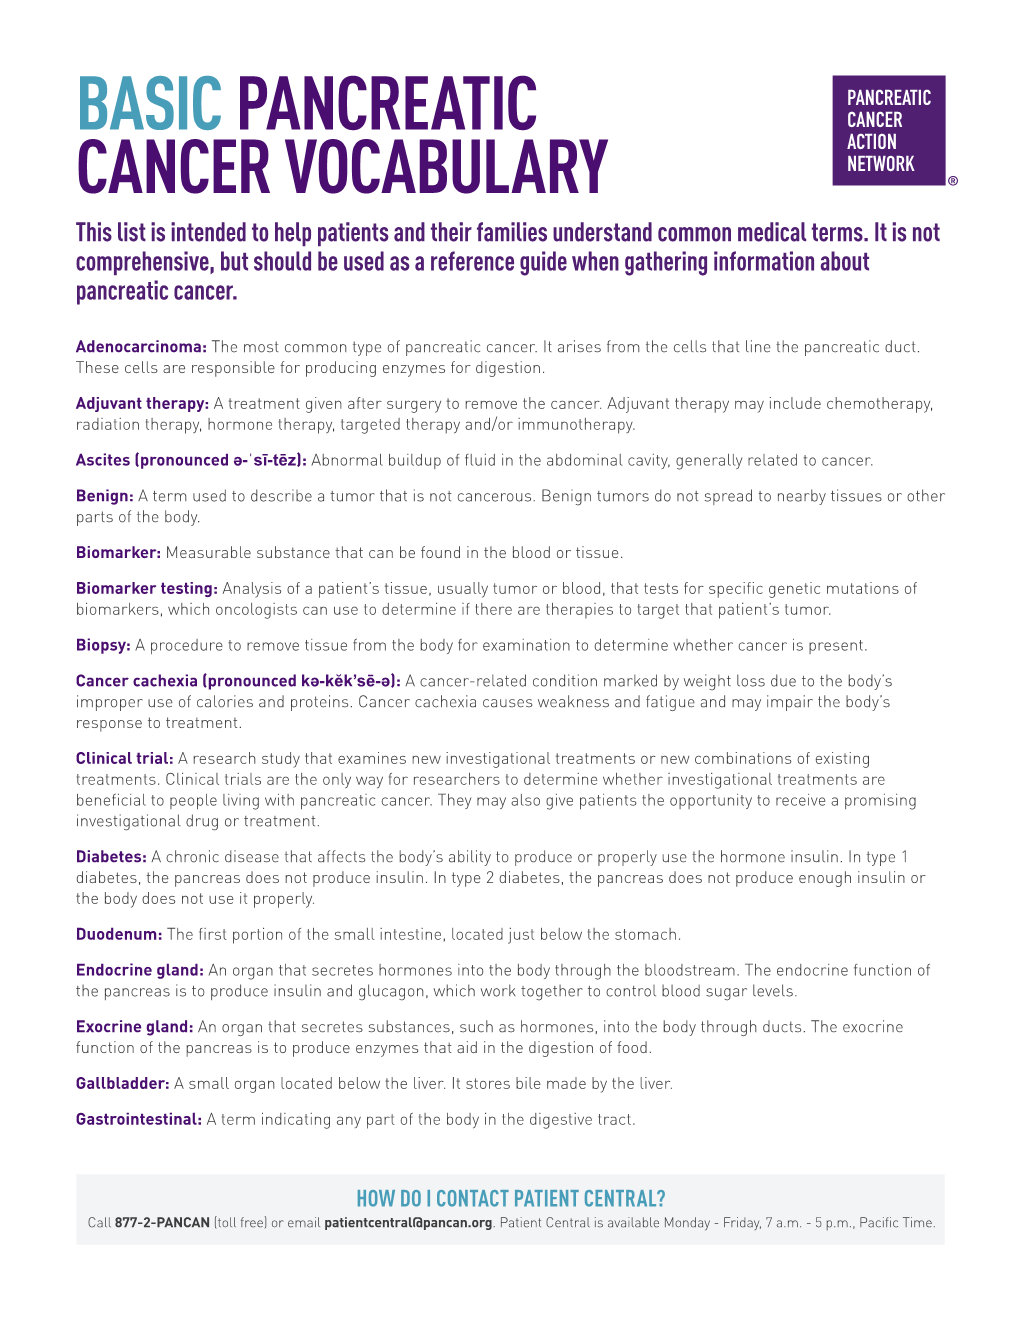 BASIC PANCREATIC CANCER VOCABULARY This List Is Intended to Help Patients and Their Families Understand Common Medical Terms